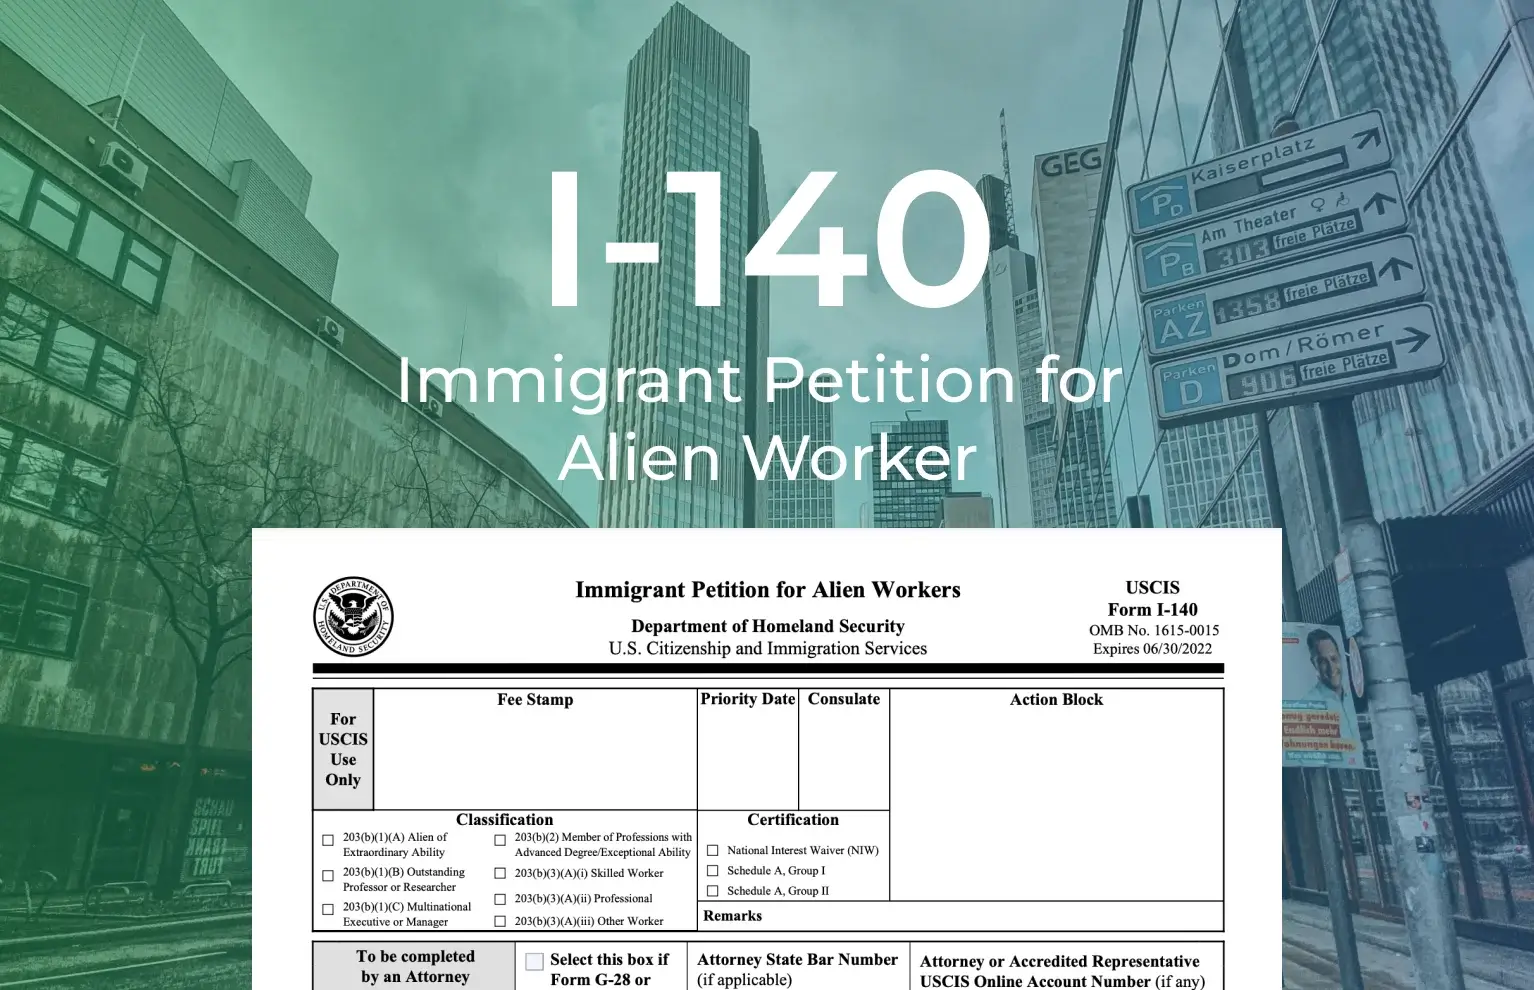 Form I-140 Processing time